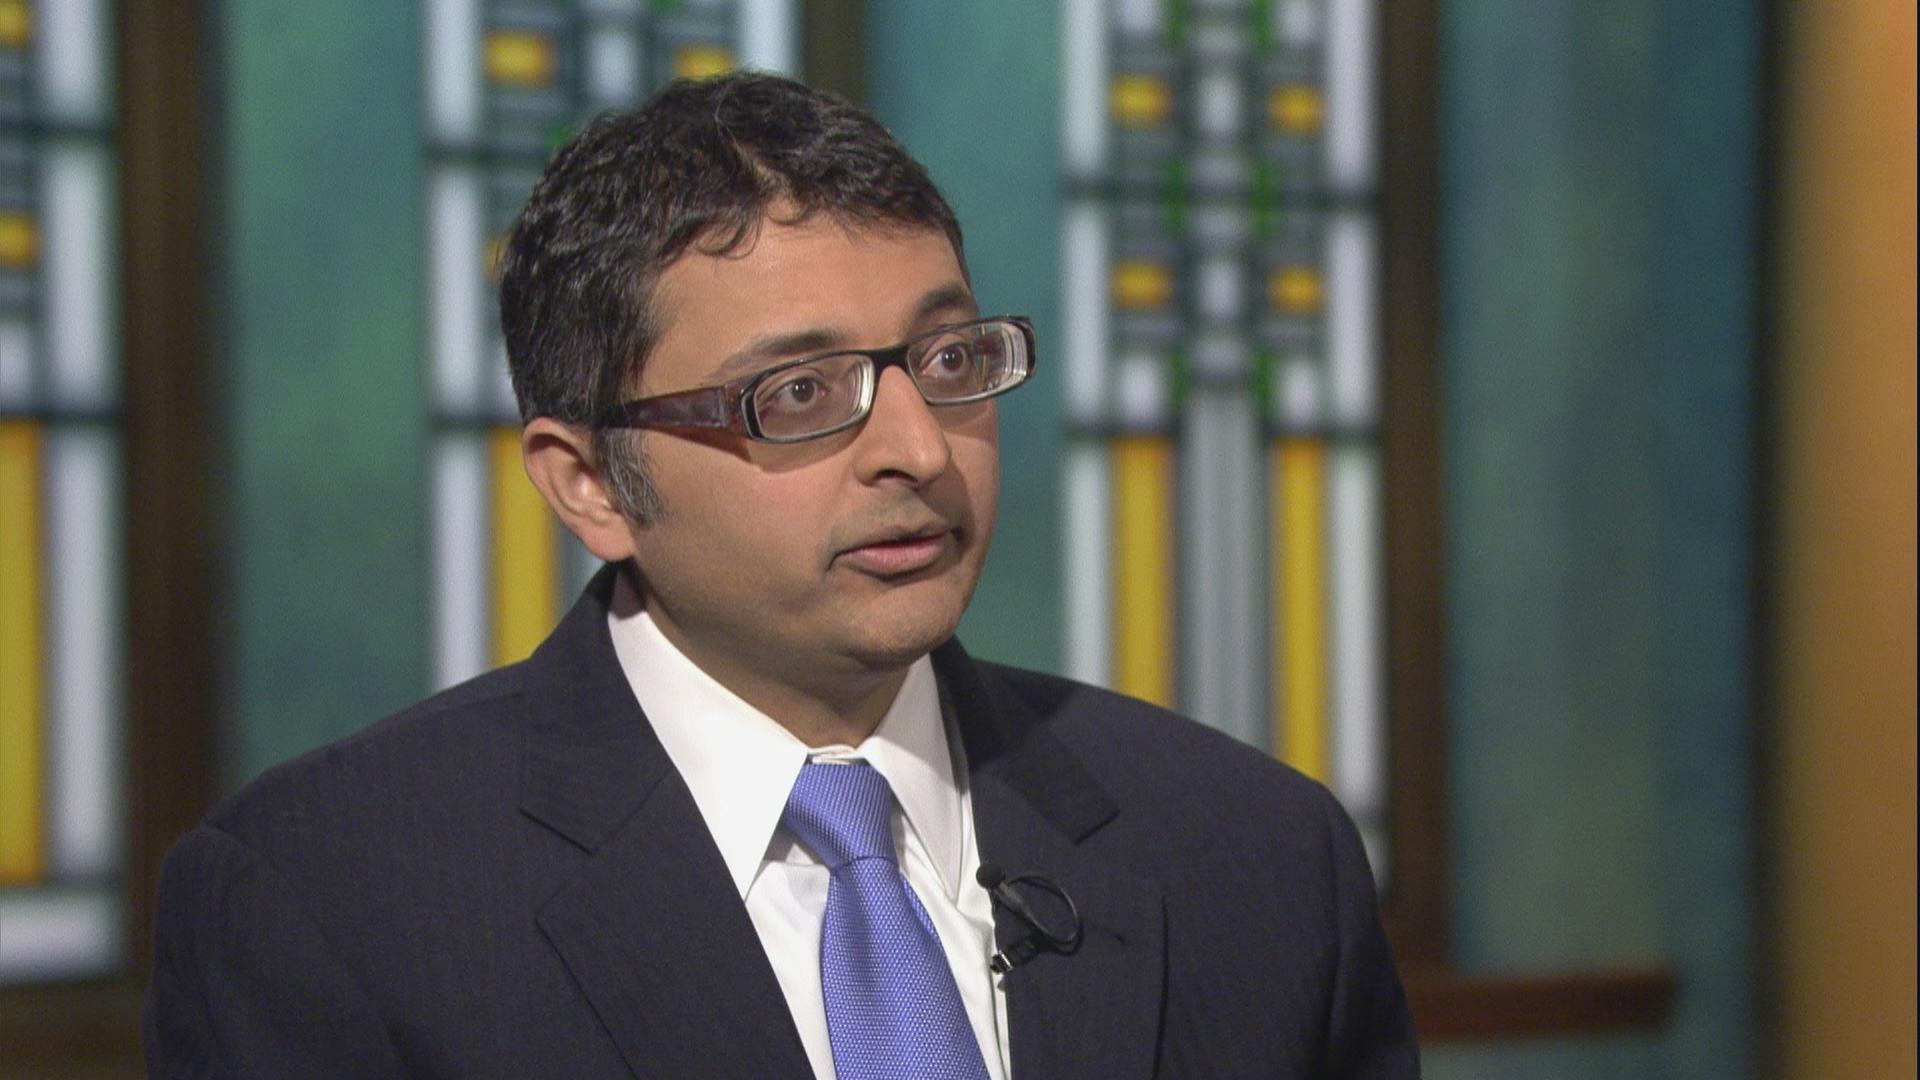 Illinois Public Health Director Dr. Nirav Shah appears on “Chicago Tonight” on Jan. 4, 2018 to discuss the state’s opioid epidemic.